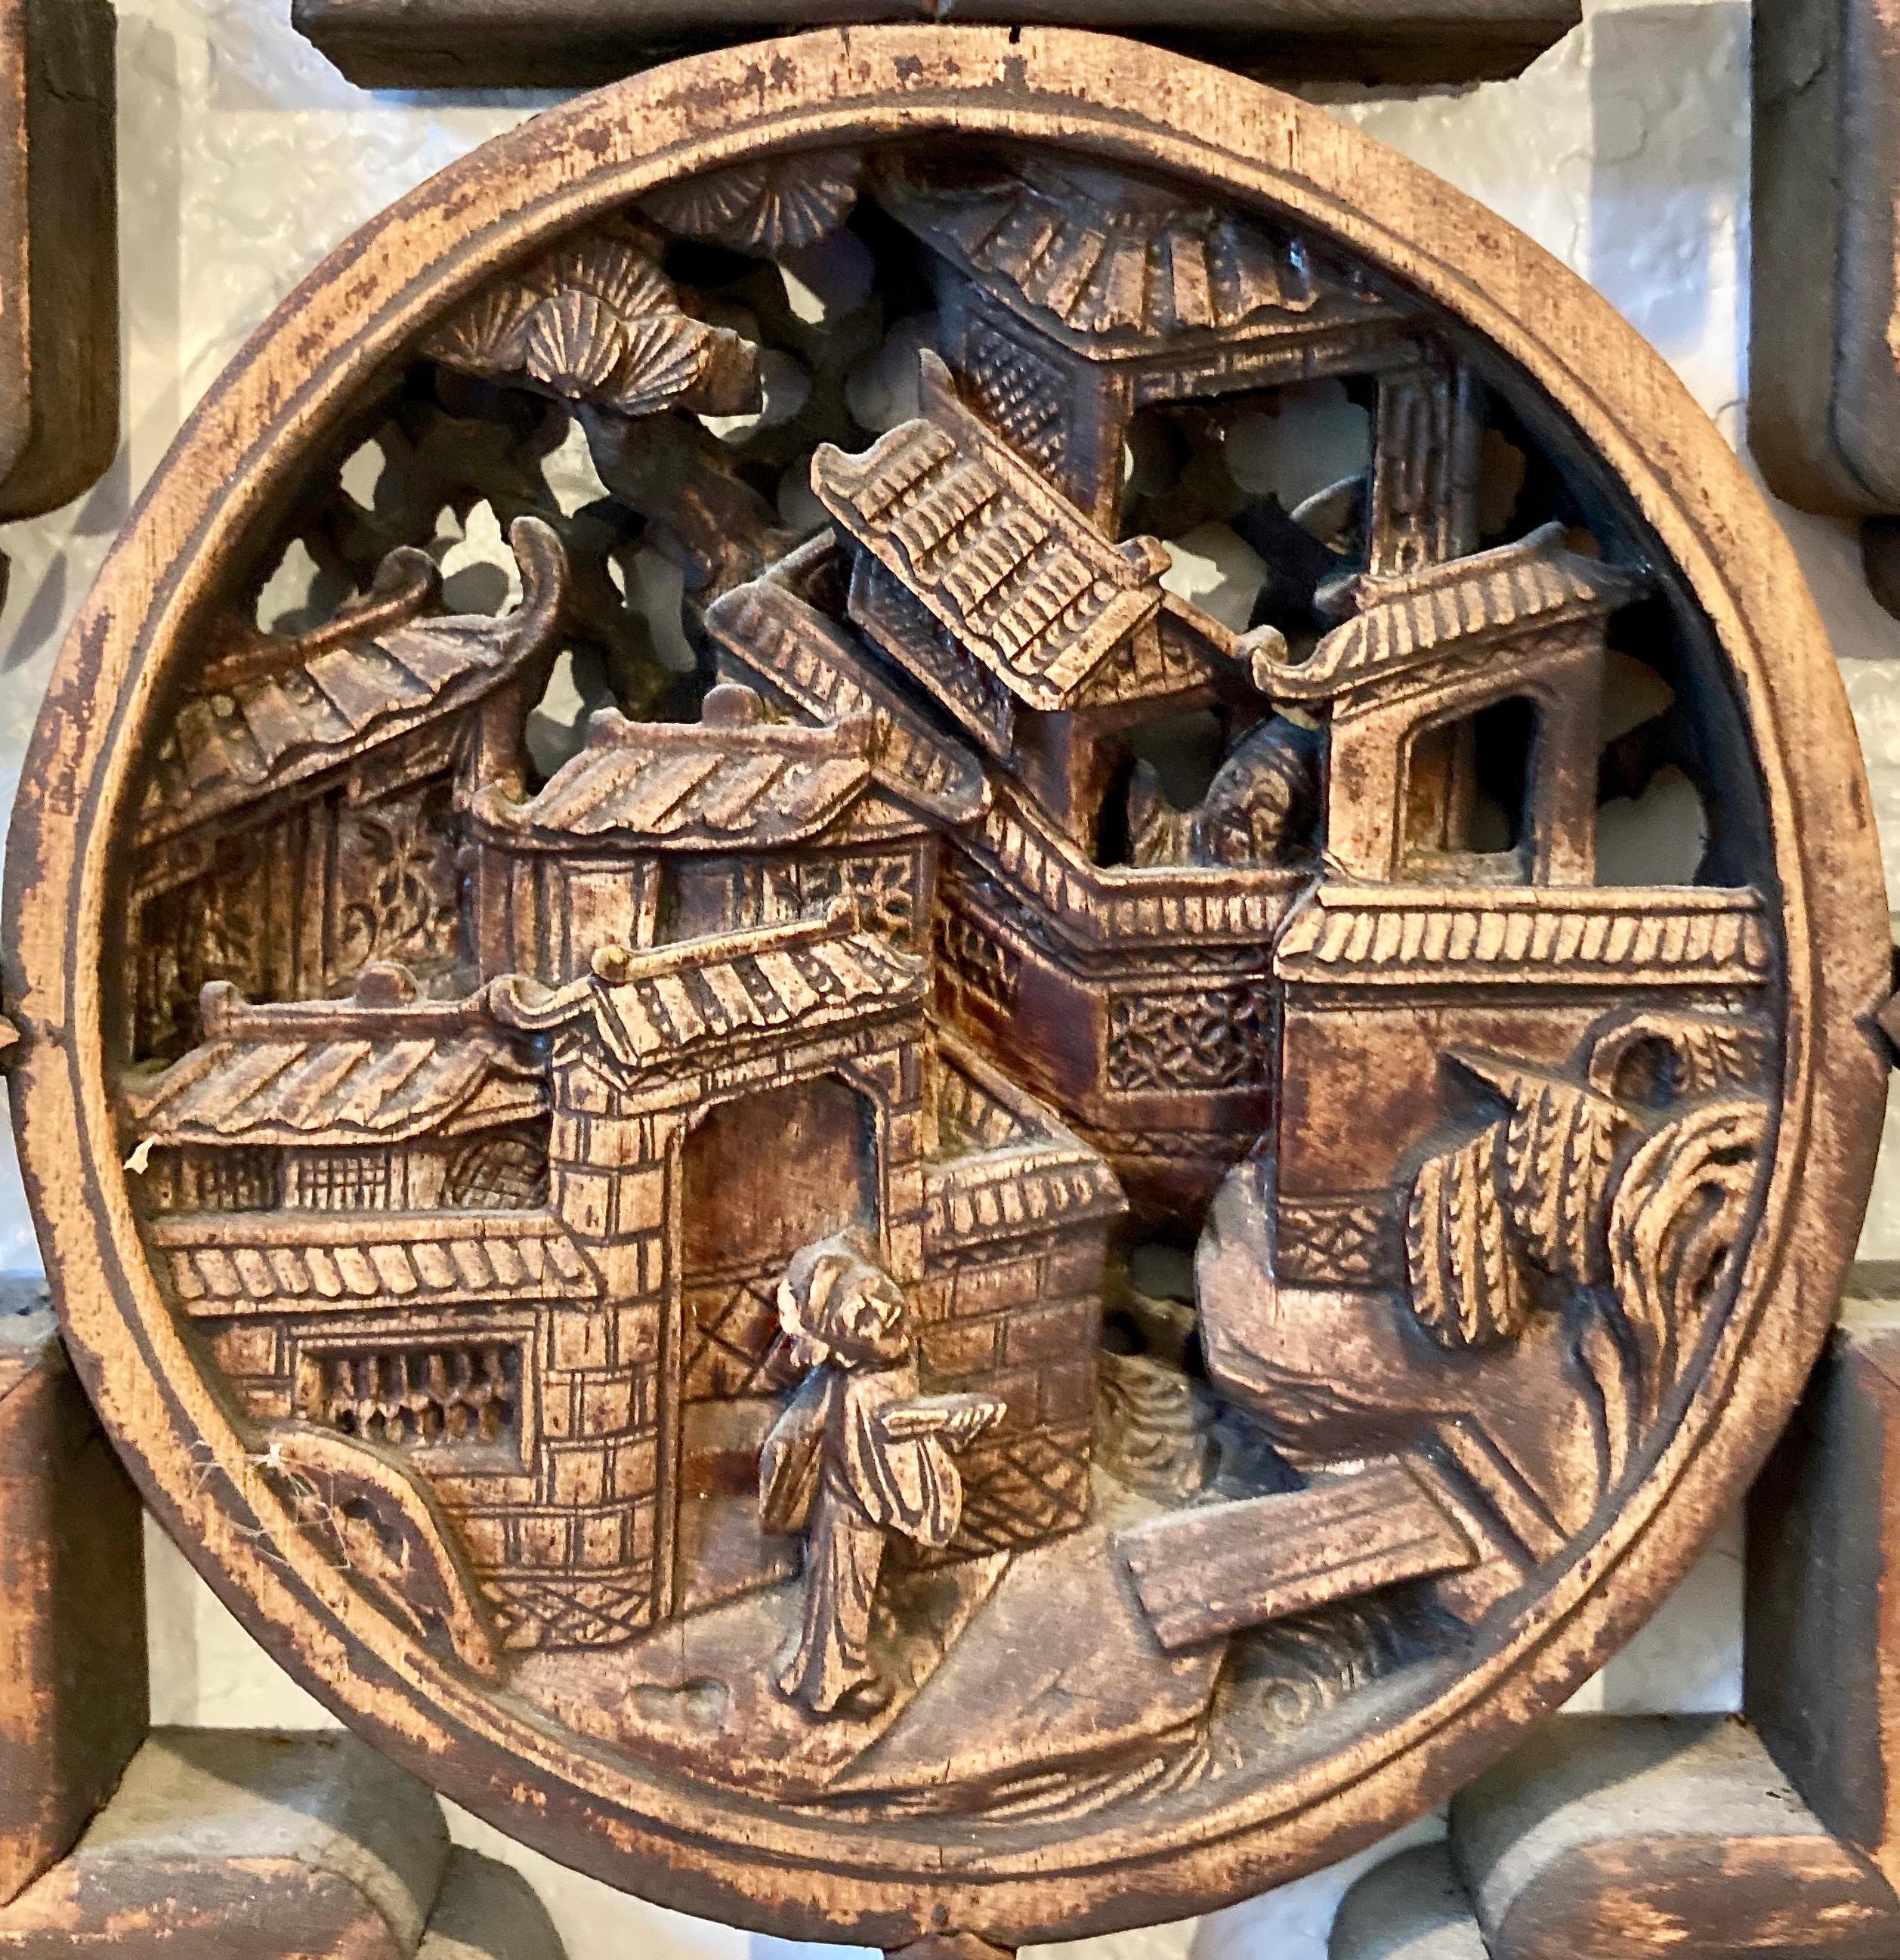 Lattice work panel with mortise + tenon joinery, and small symbolic carvings inset throughout. Circular center carving with personage and dwelling motif.